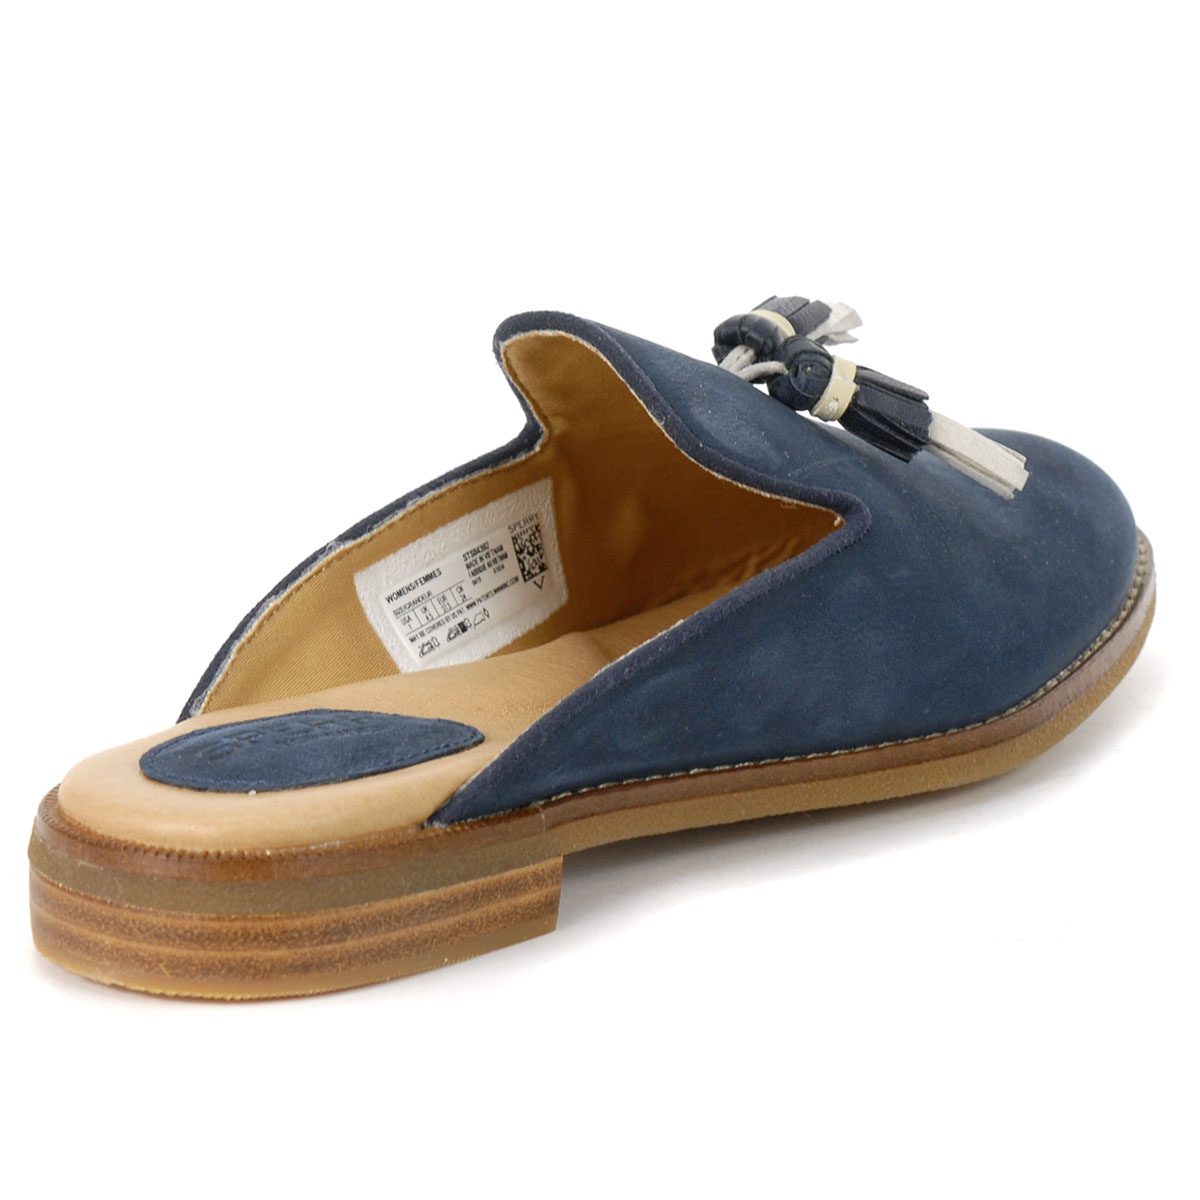 Sperry Top-Sider Women's Seaport Levy 